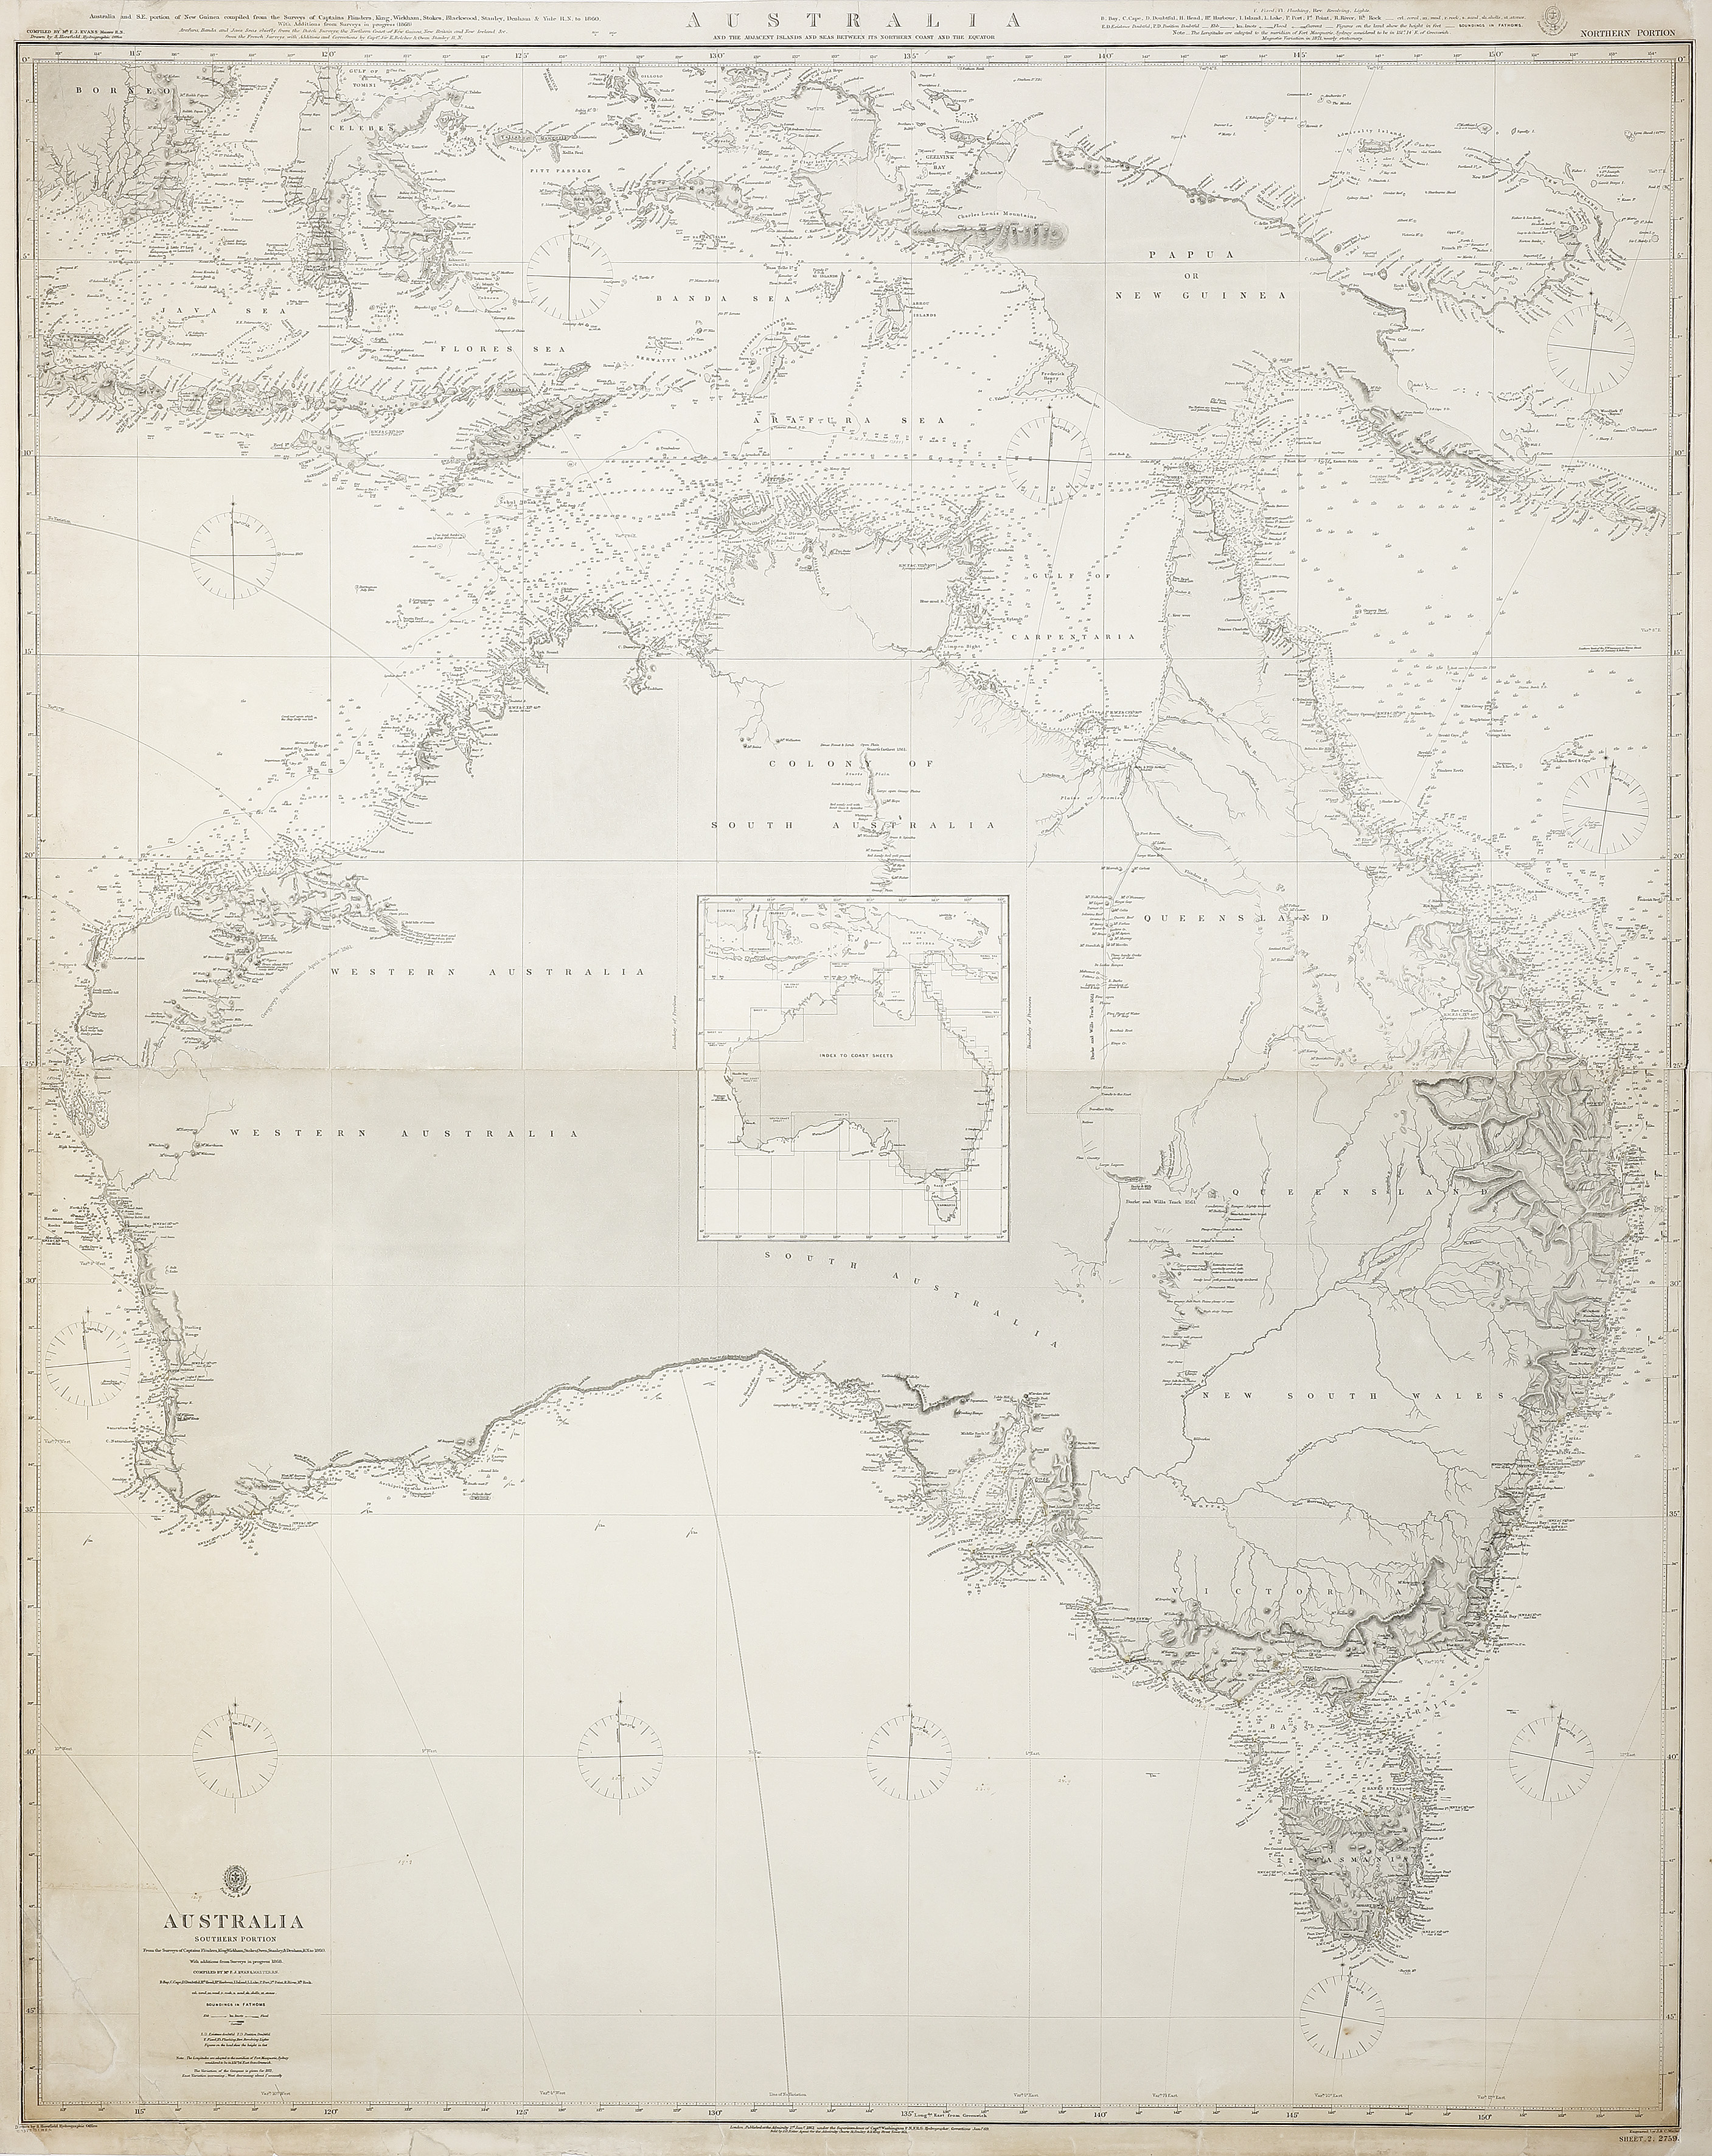 [AUSTRALIA] Australia and the Adjacent Islands and Seas Between its Northern Coast and the Equator. - Antique Map from 1874